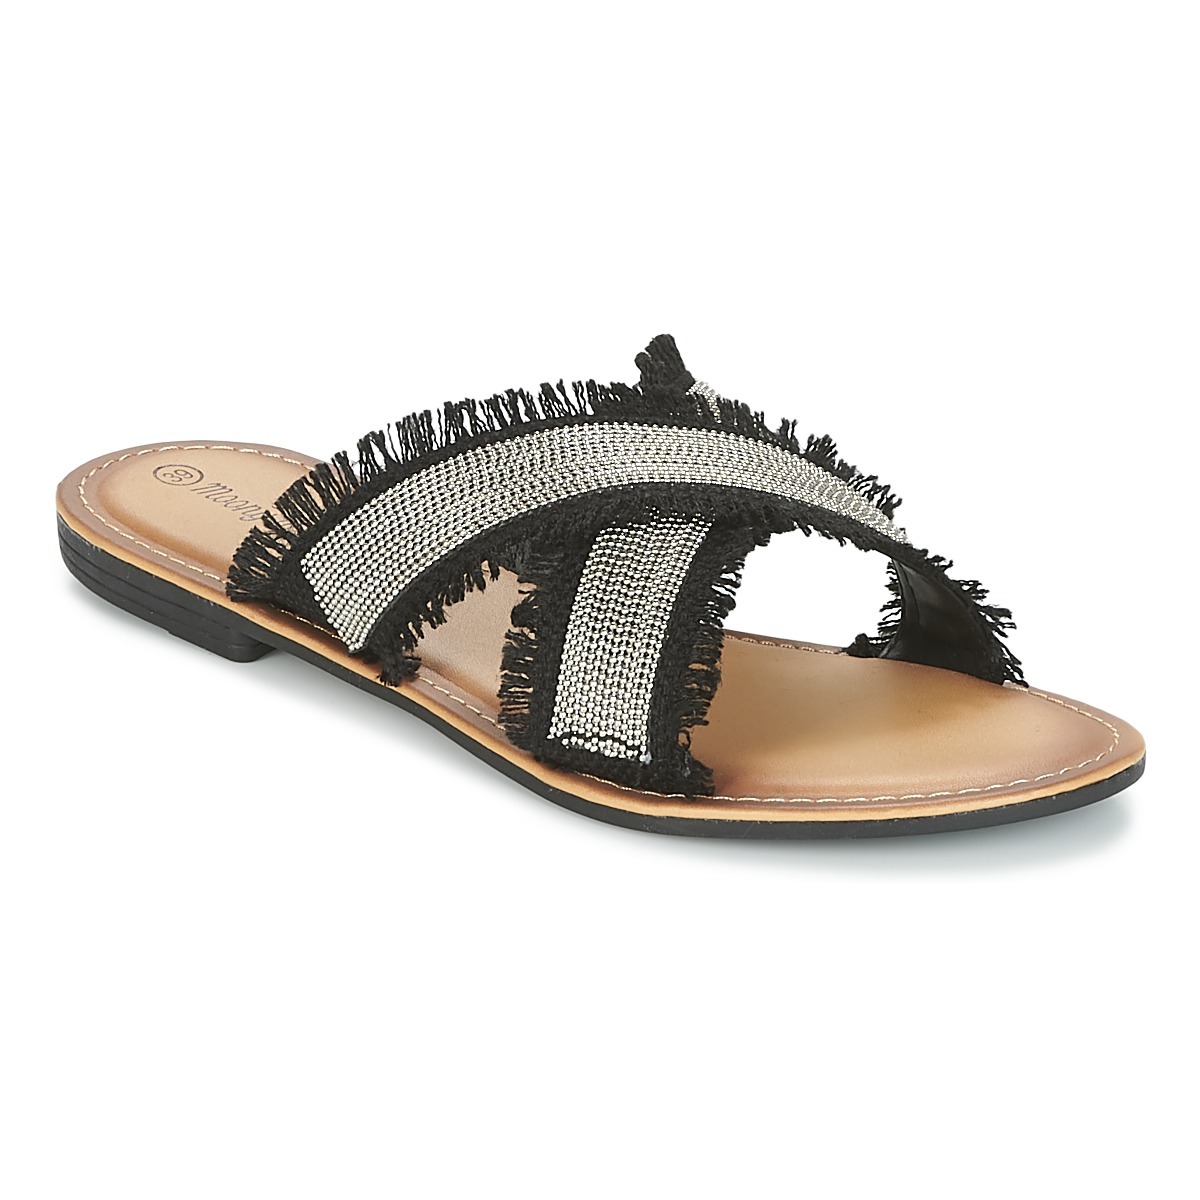 Spartoo Womens Slippers in Black from Moony Mood GOOFASH